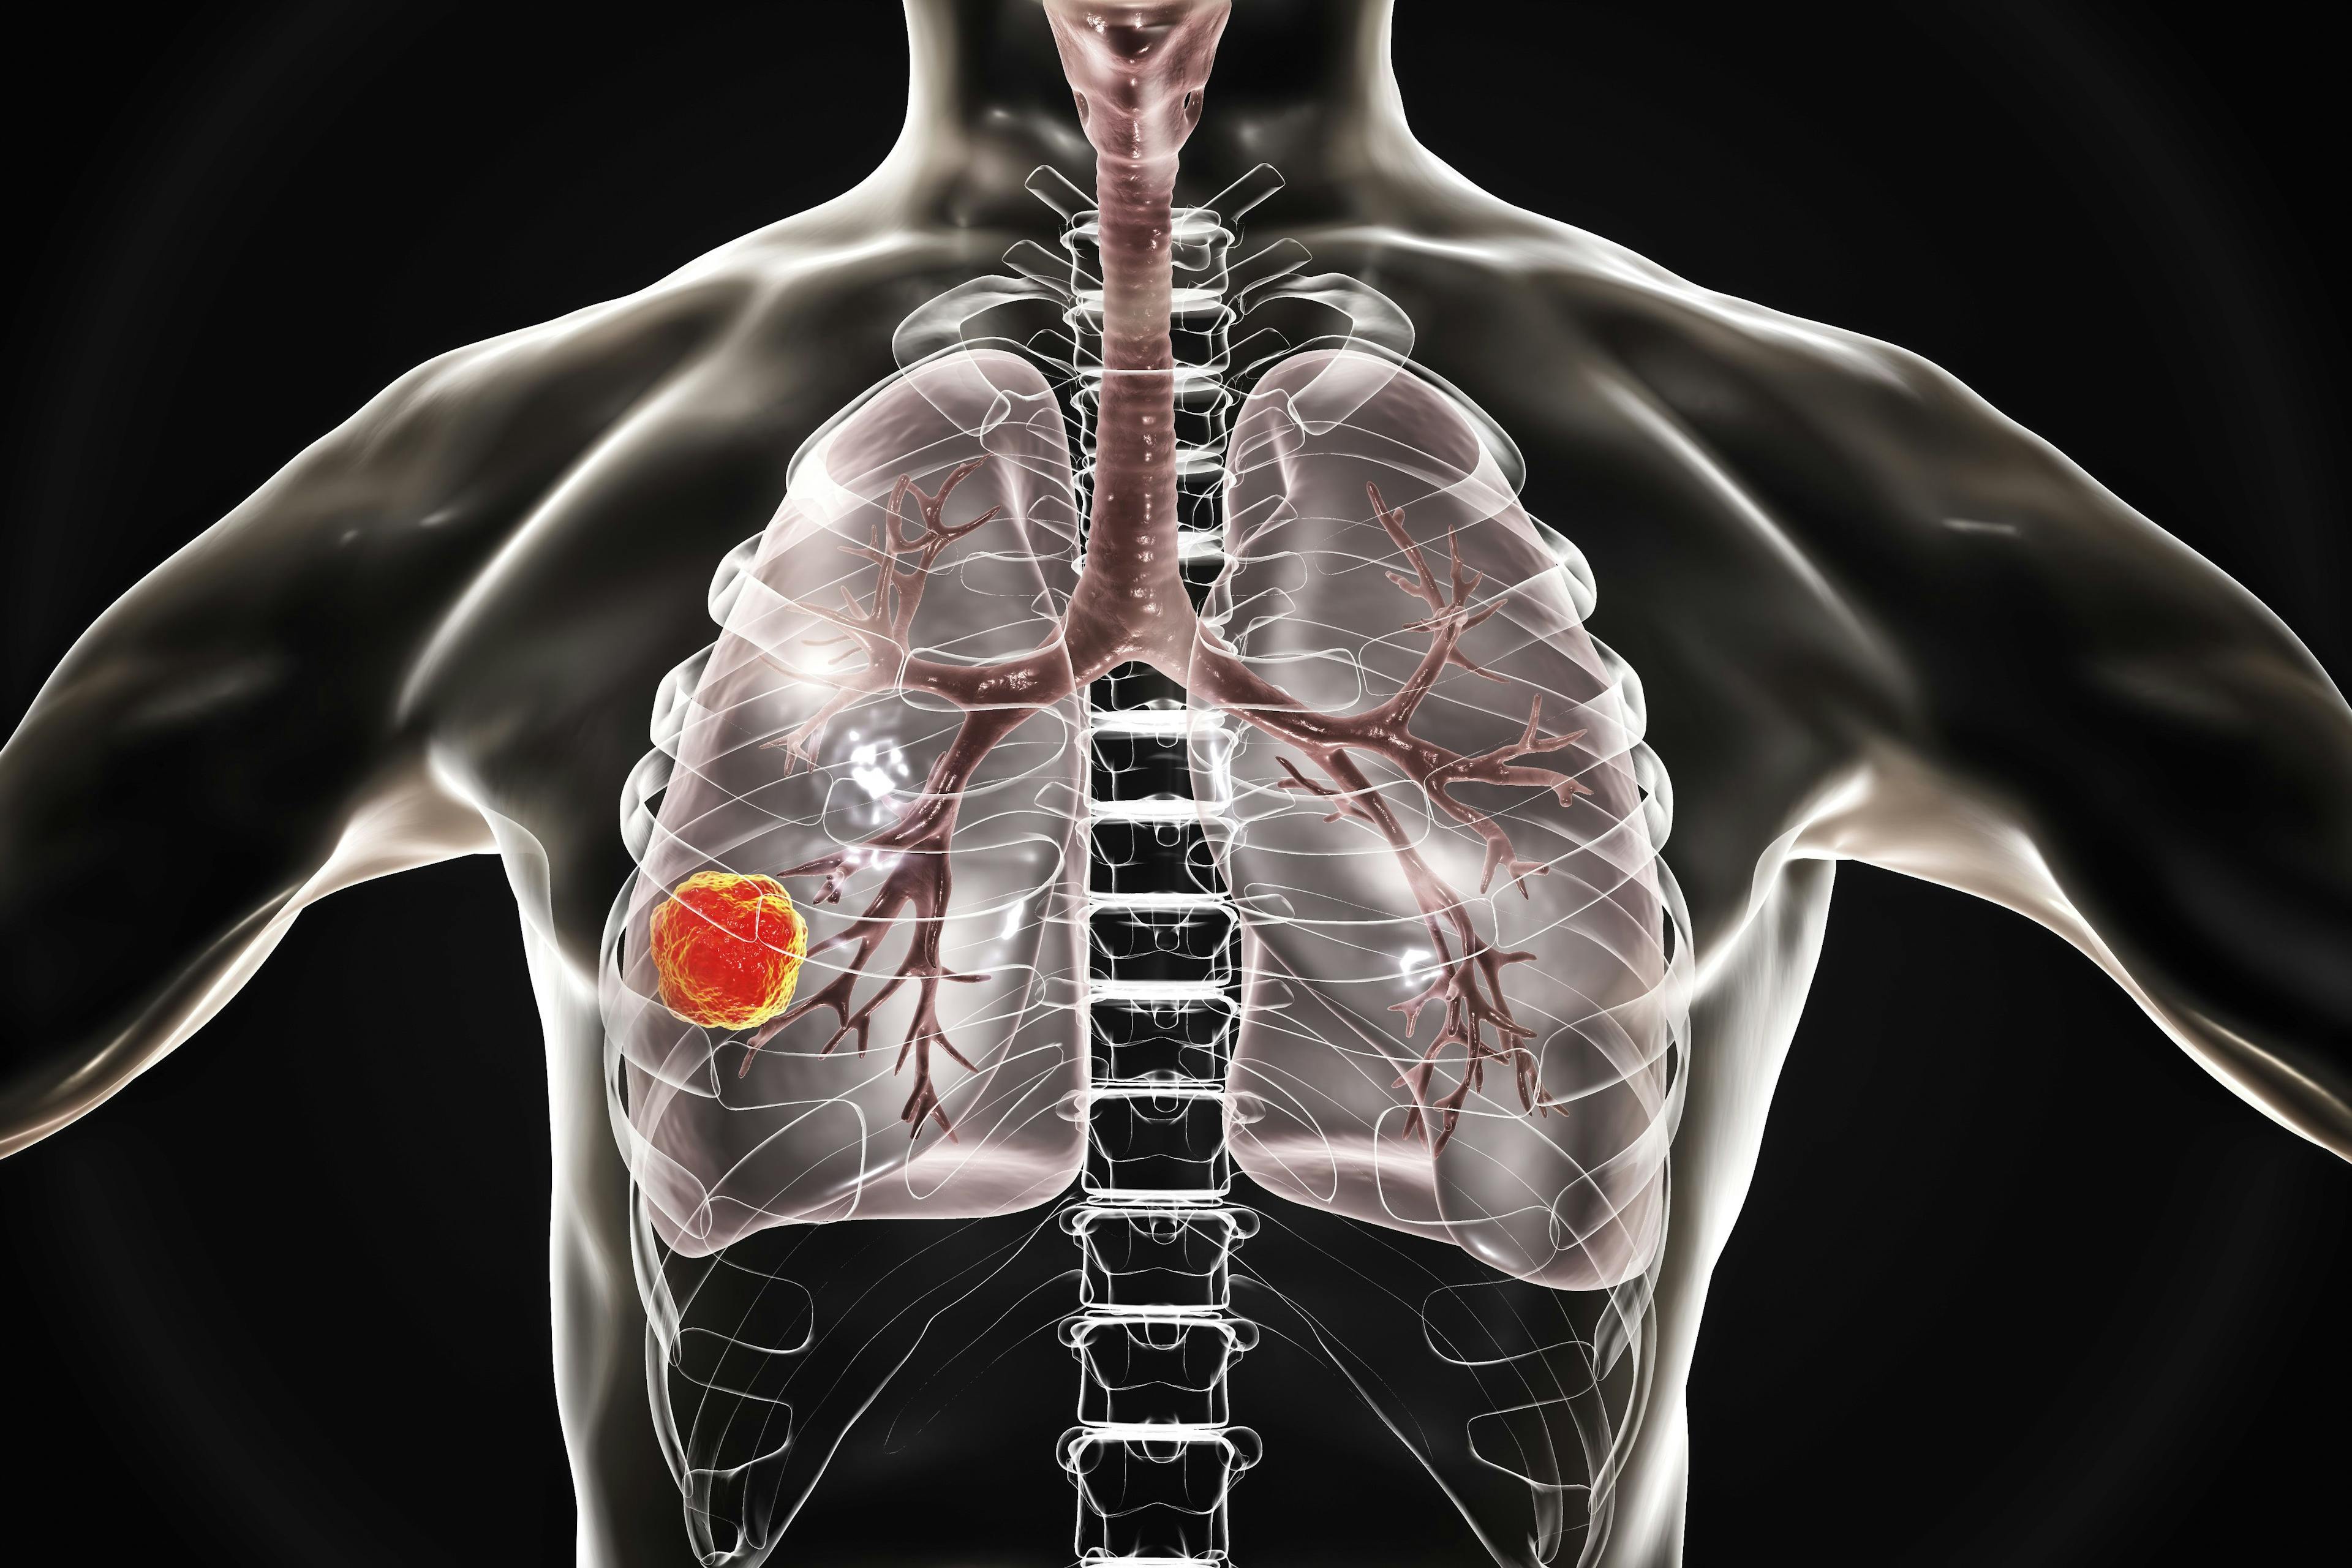 Model Predicts Non-Small Cell Lung Cancer Patient Outcomes to Immunotherapy